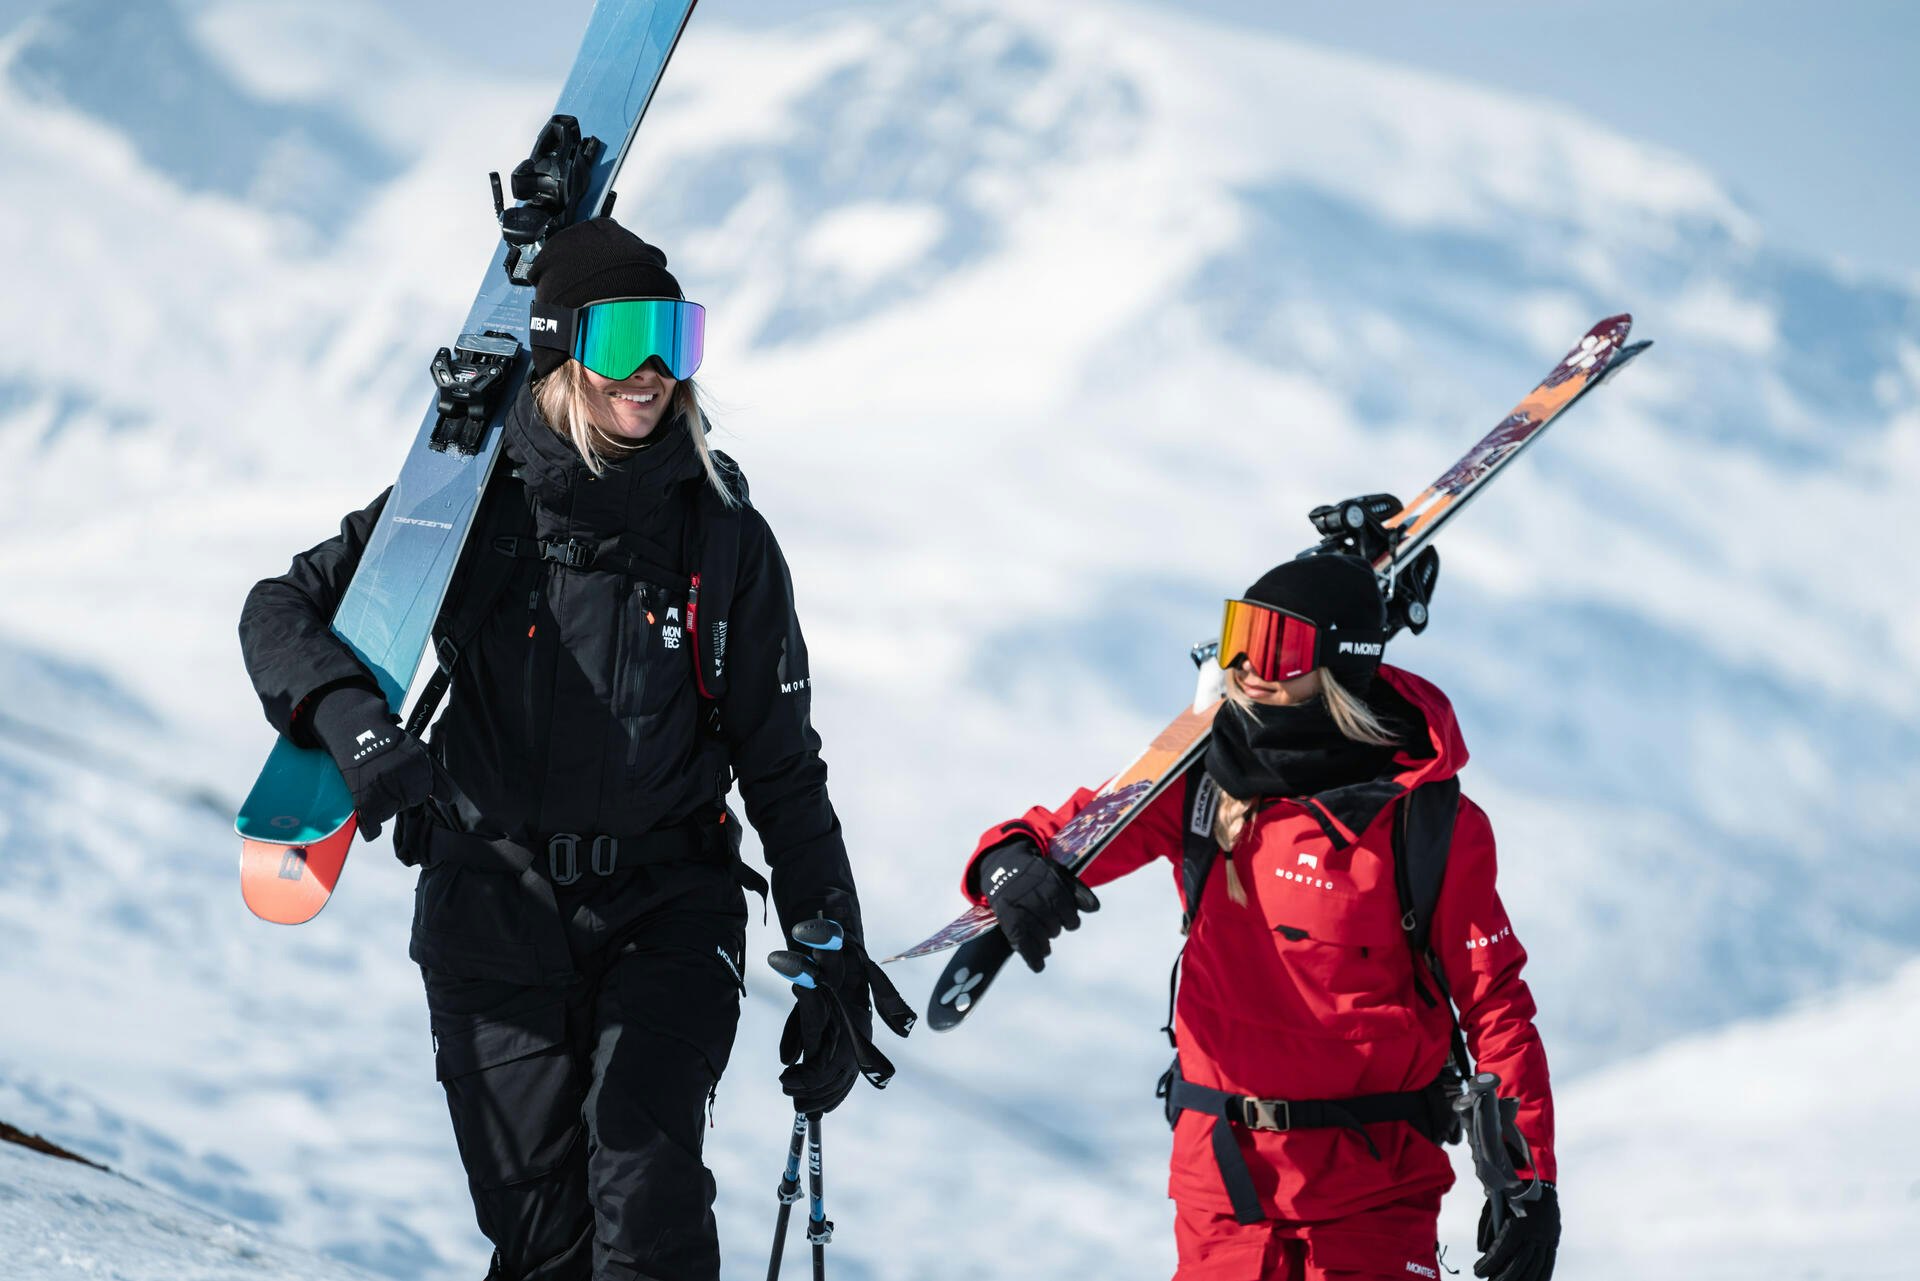 What is the best VLT for variable conditions when it comes to ski or snowboard goggles